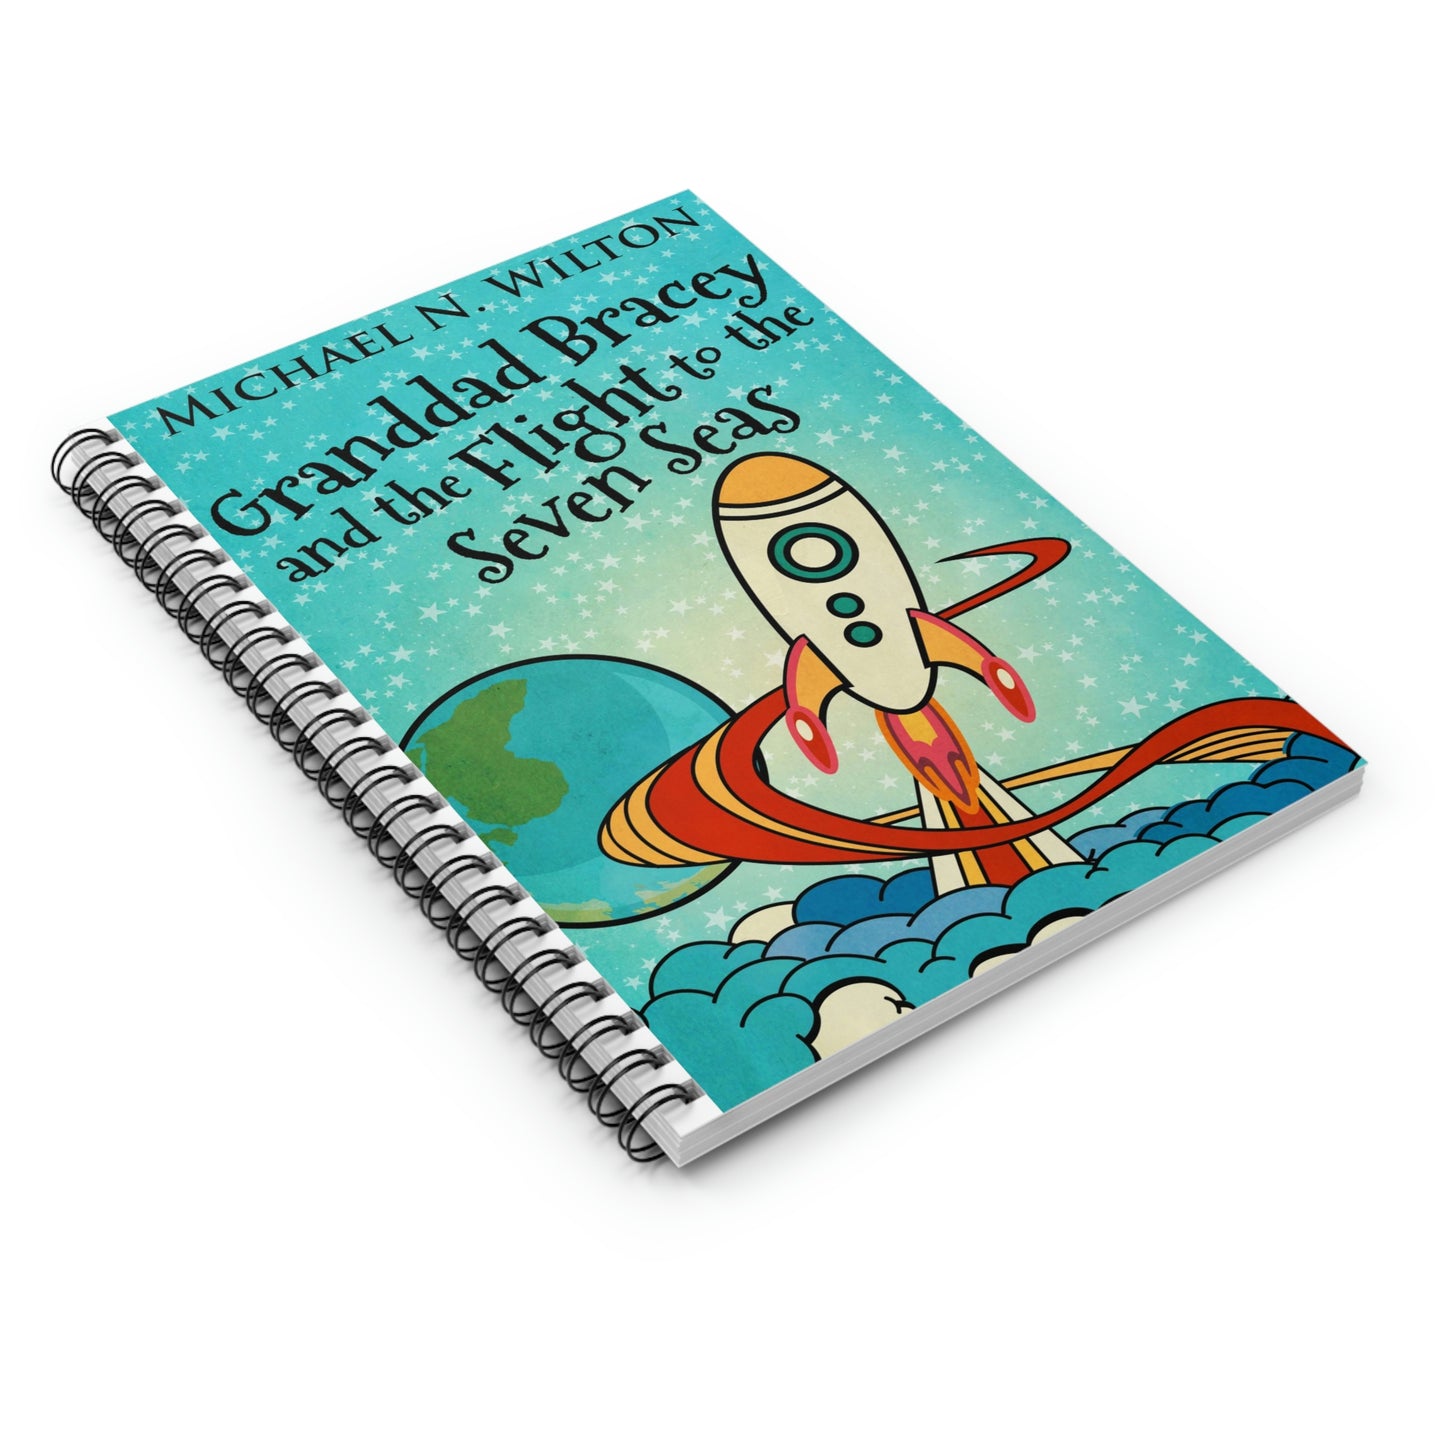 Granddad Bracey And The Flight To The Seven Seas - Spiral Notebook